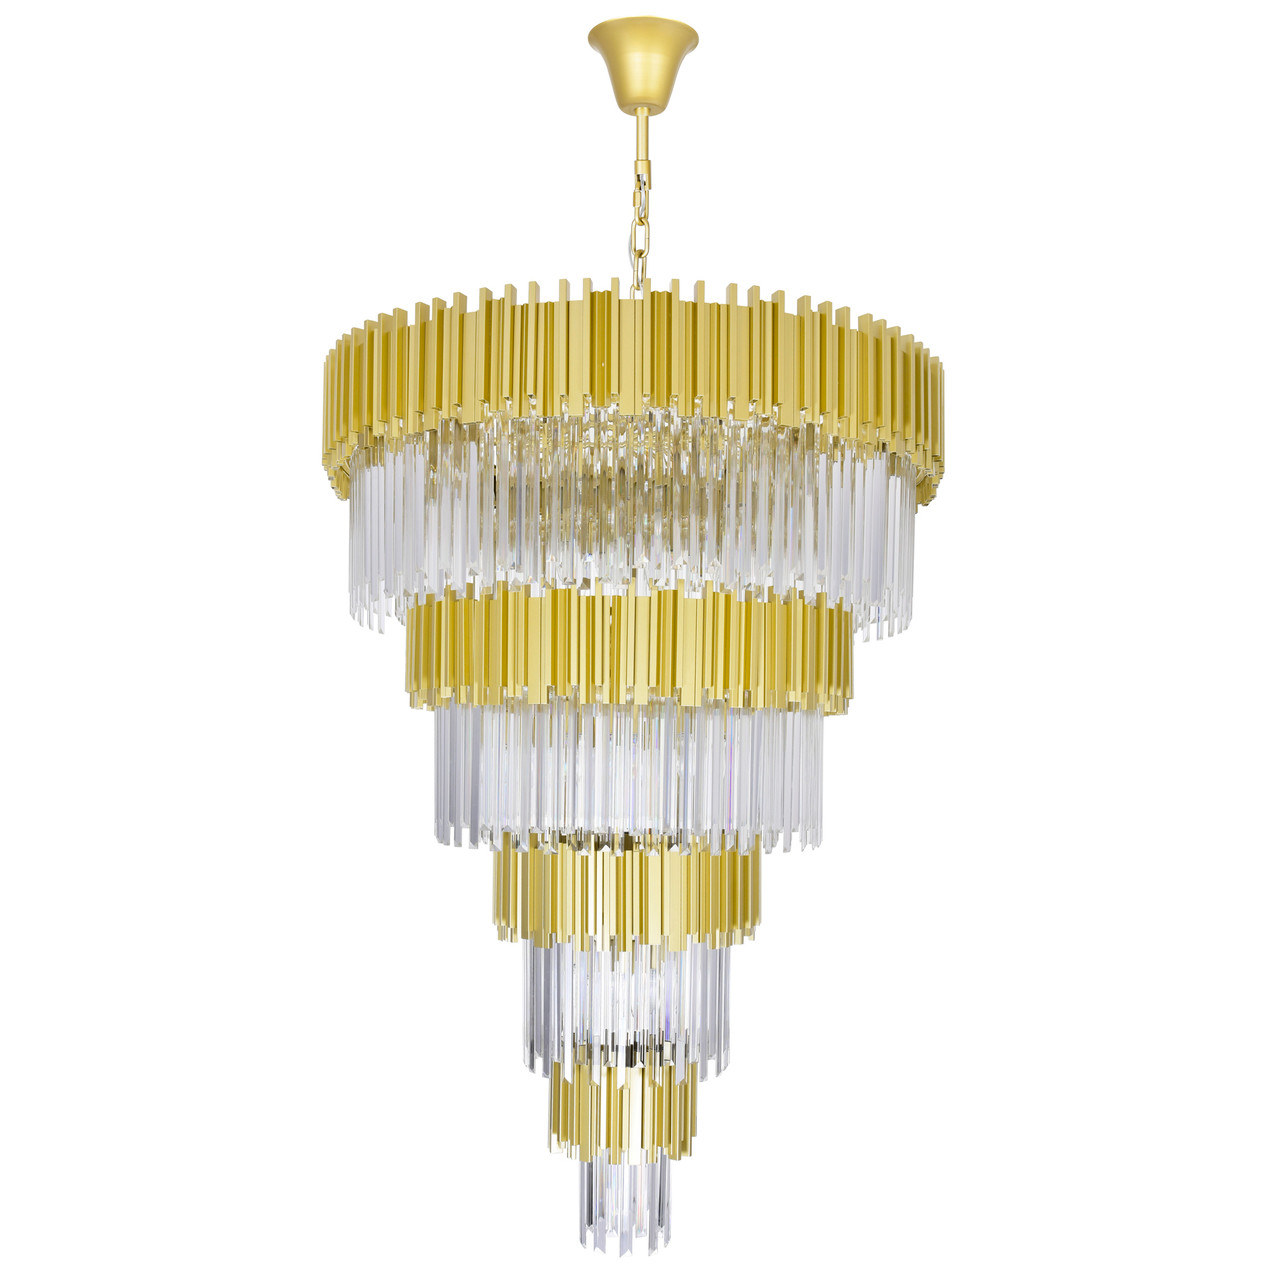 CWI LIGHTING 1112P40-34-169 34 Light Down Chandelier with Medallion Gold Finish